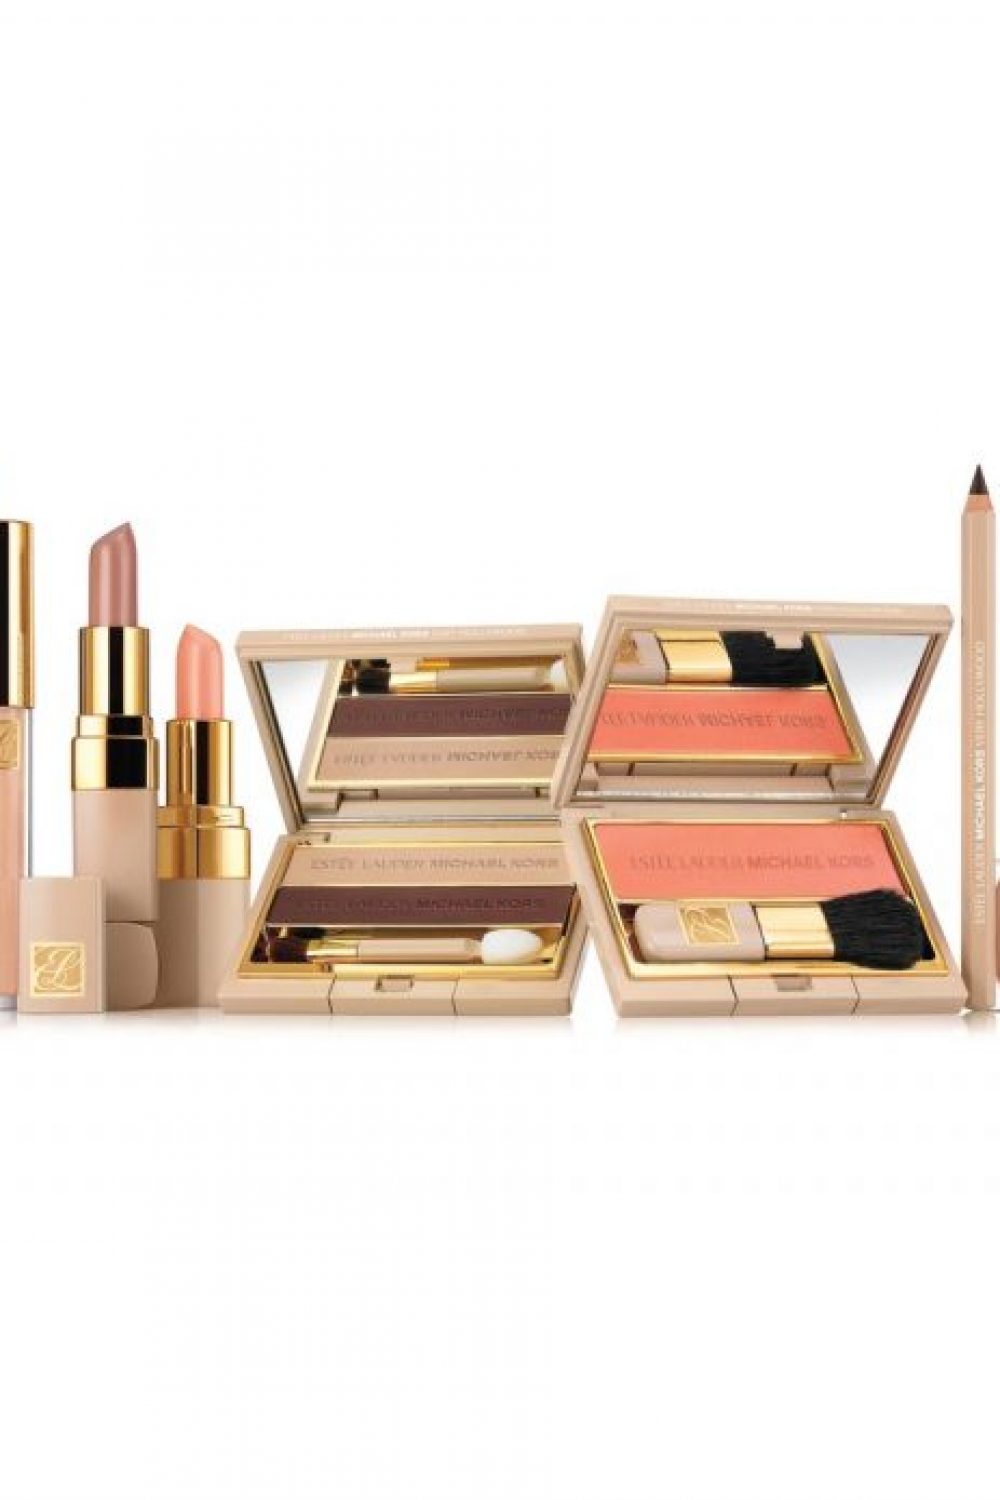 Michael Kors Very Hollywood Color Collection by Estee Lauder